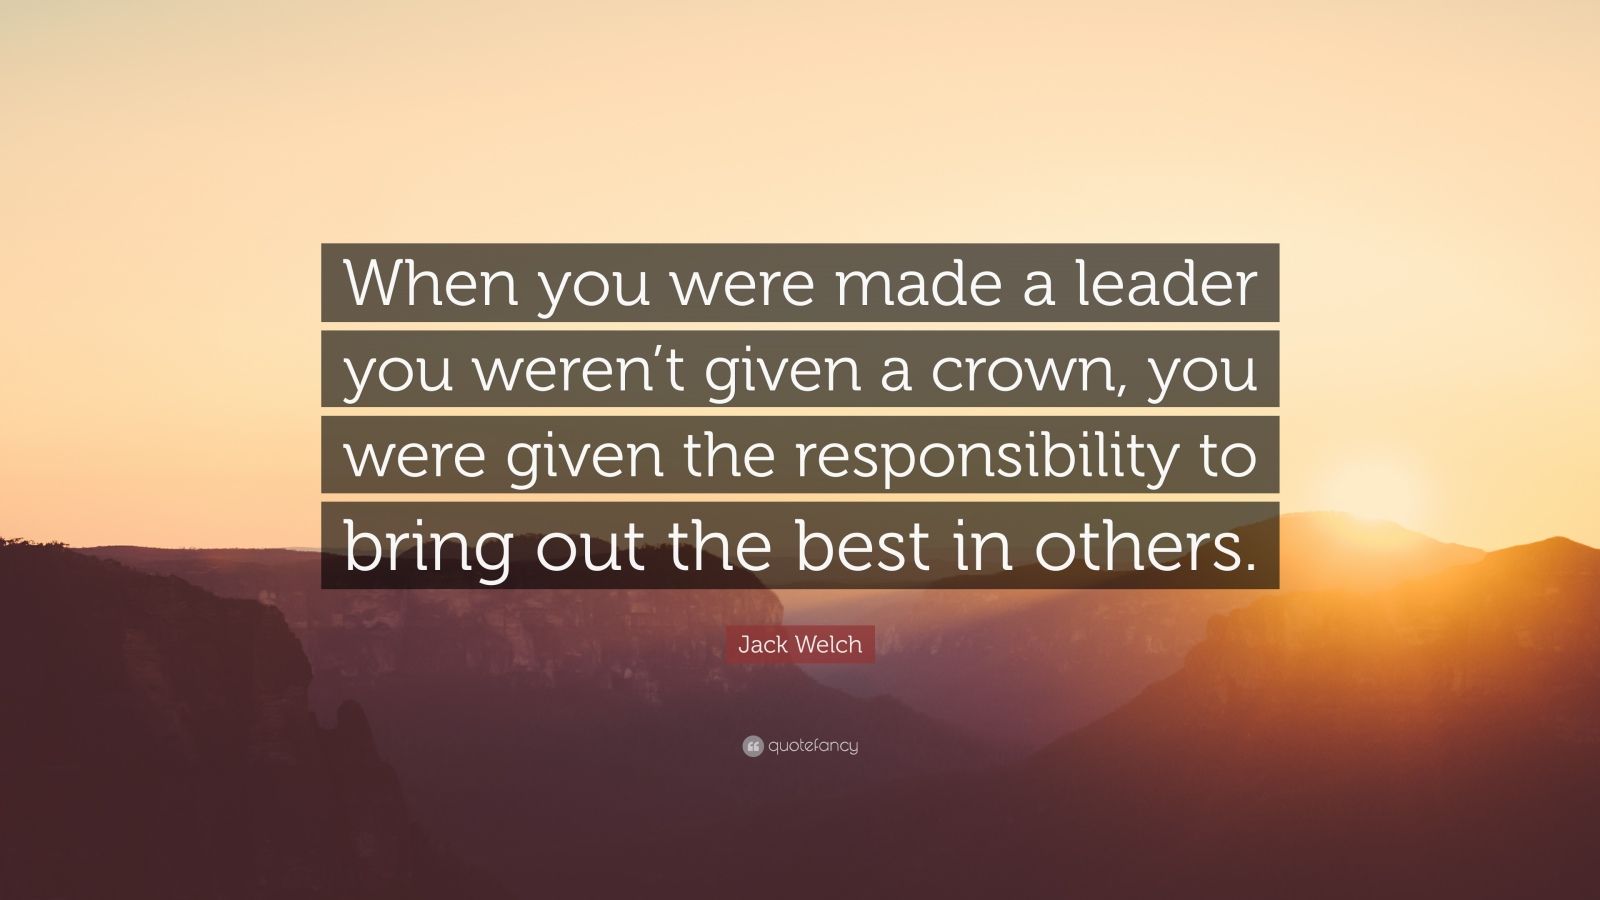 Jack Welch Quote: “When you were made a leader you weren’t given a